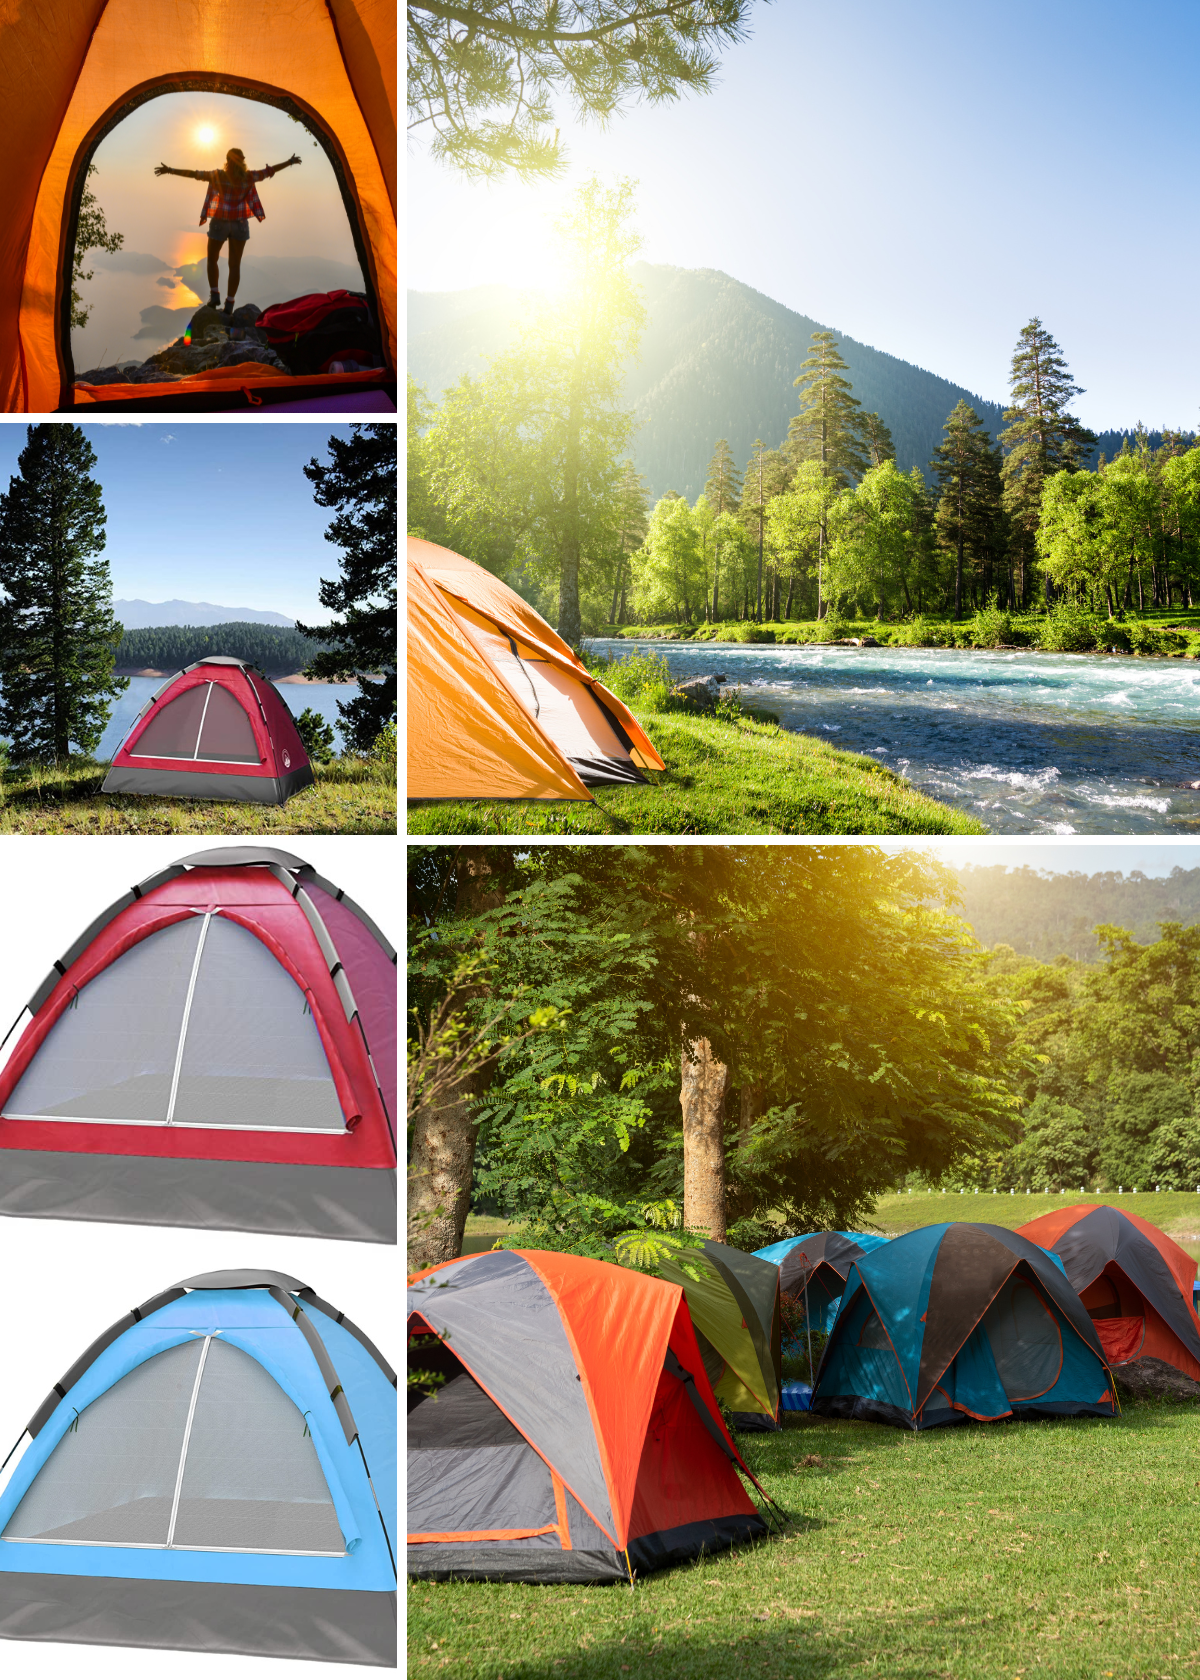 The 10 Best Tent Options for Every Budget